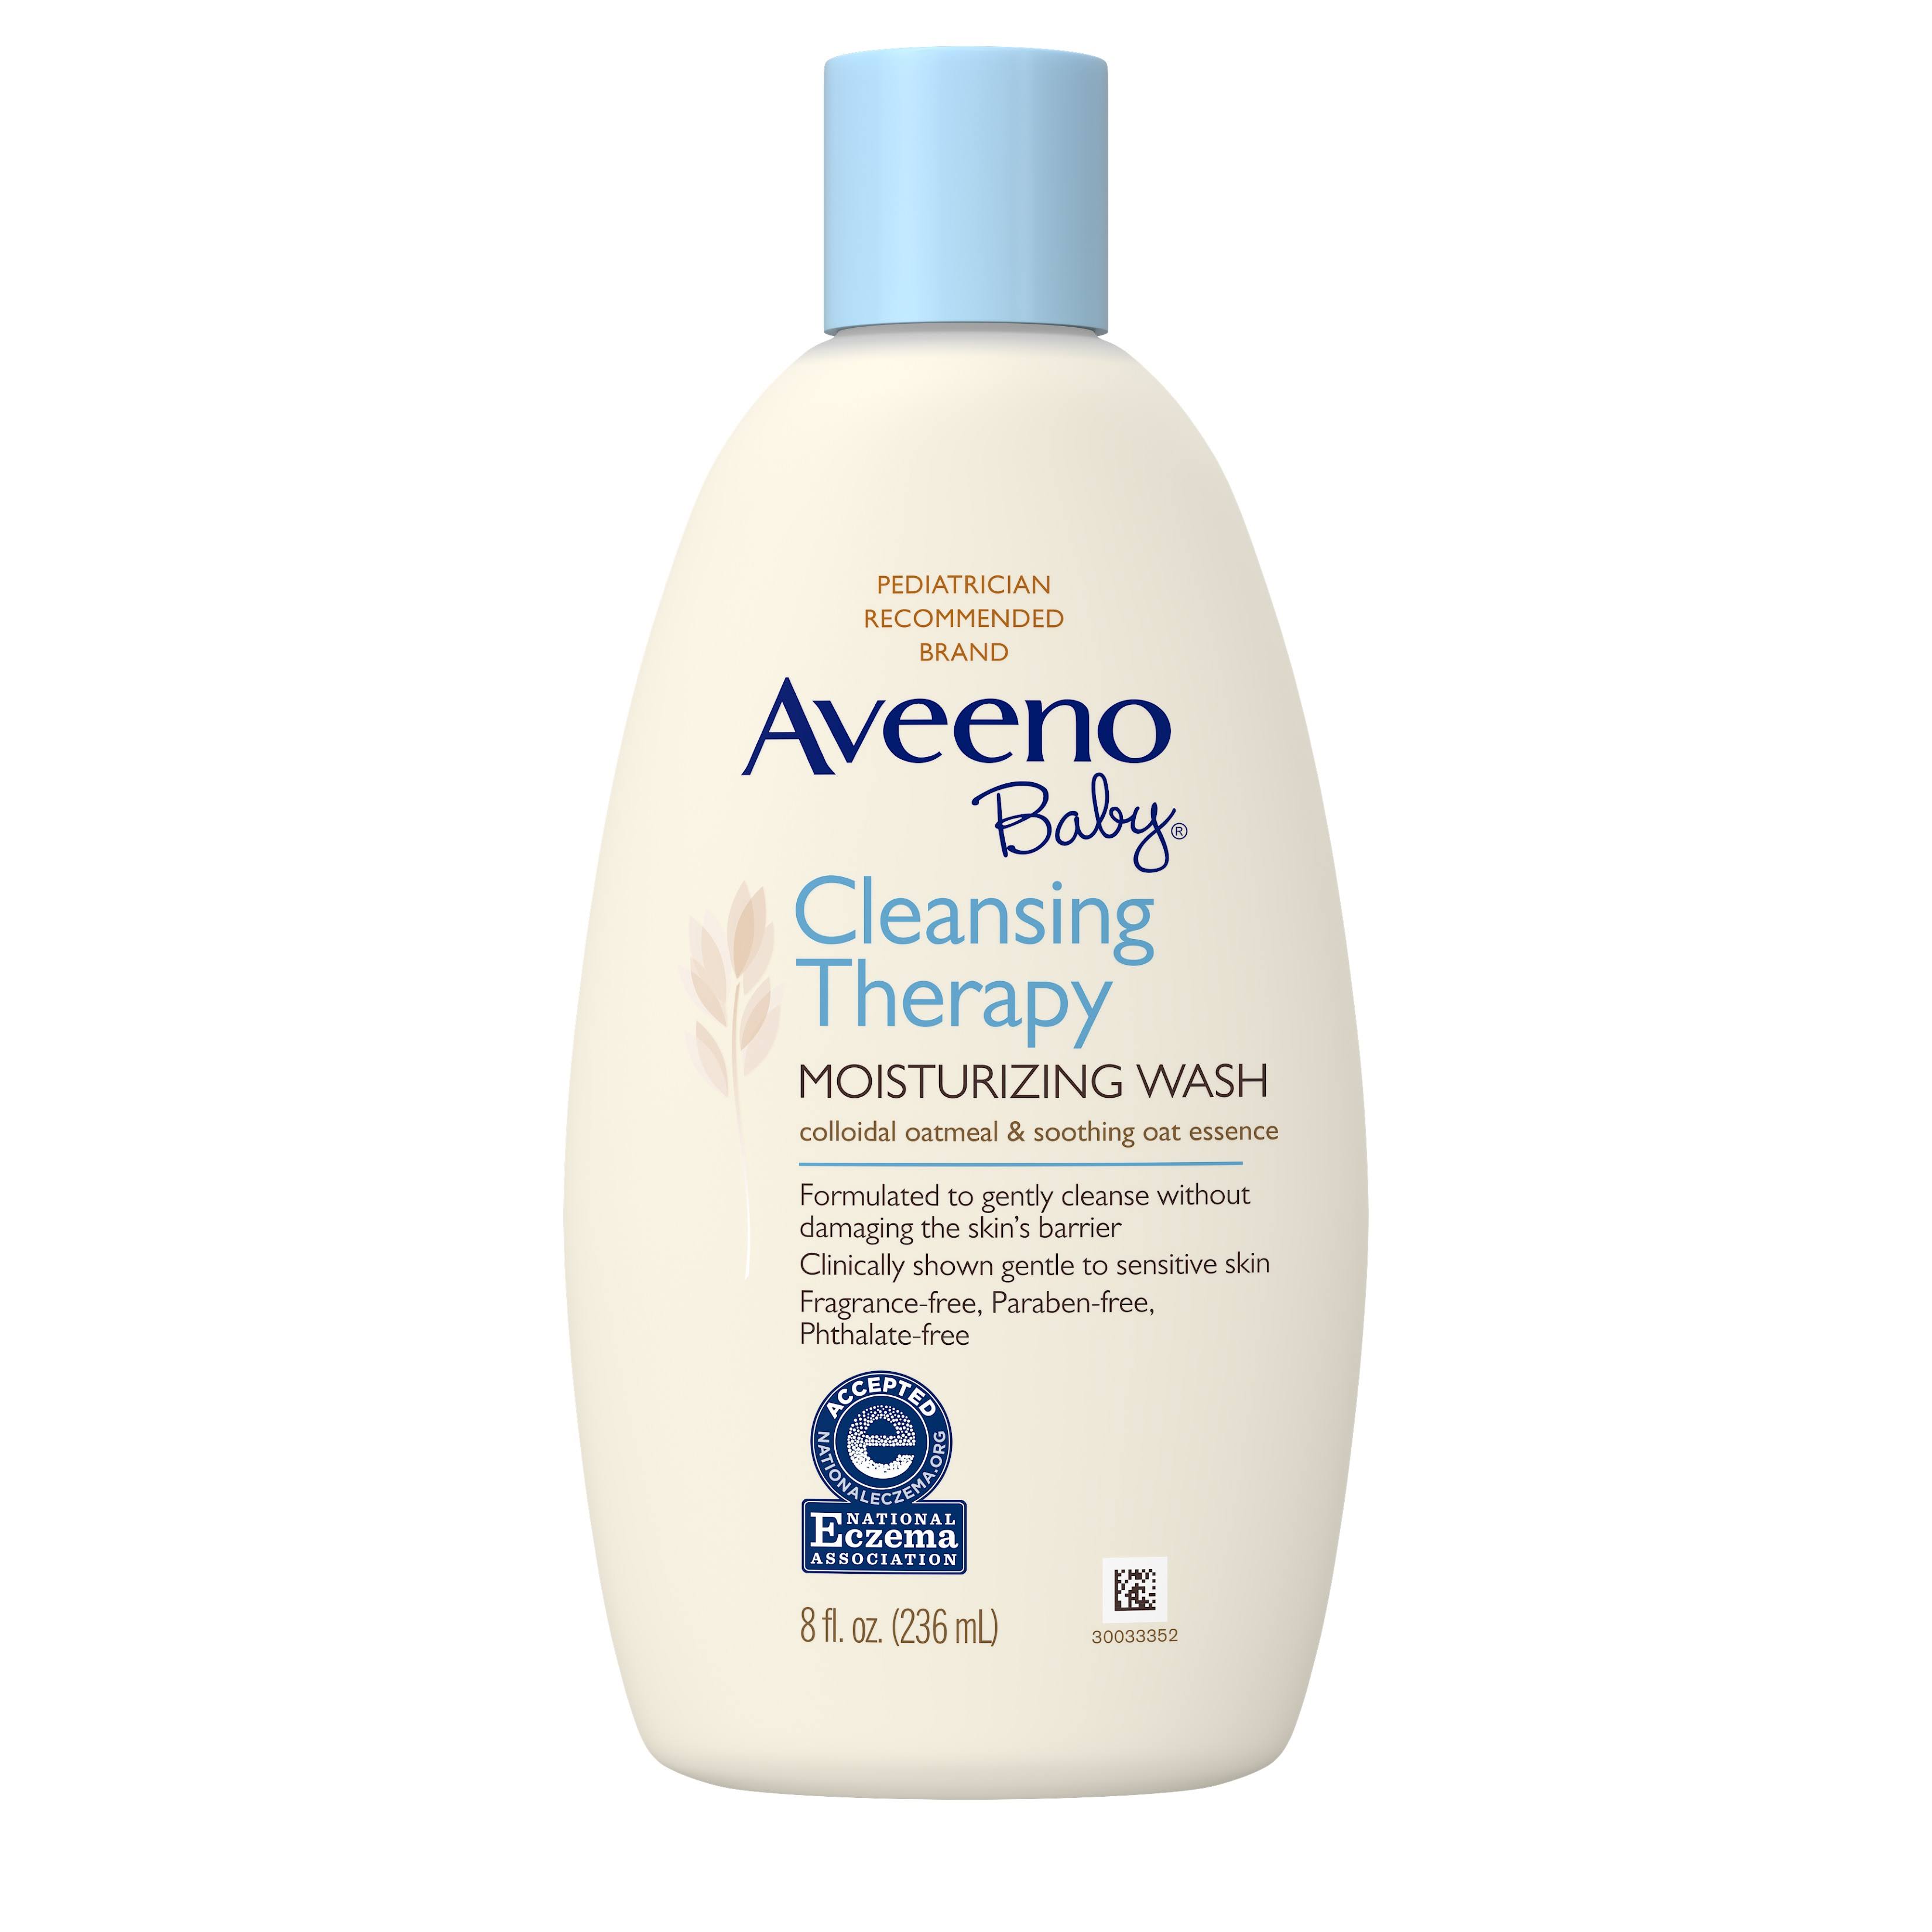 Aveeno Baby Cleansing Therapy Moisturizing Wash - 8oz